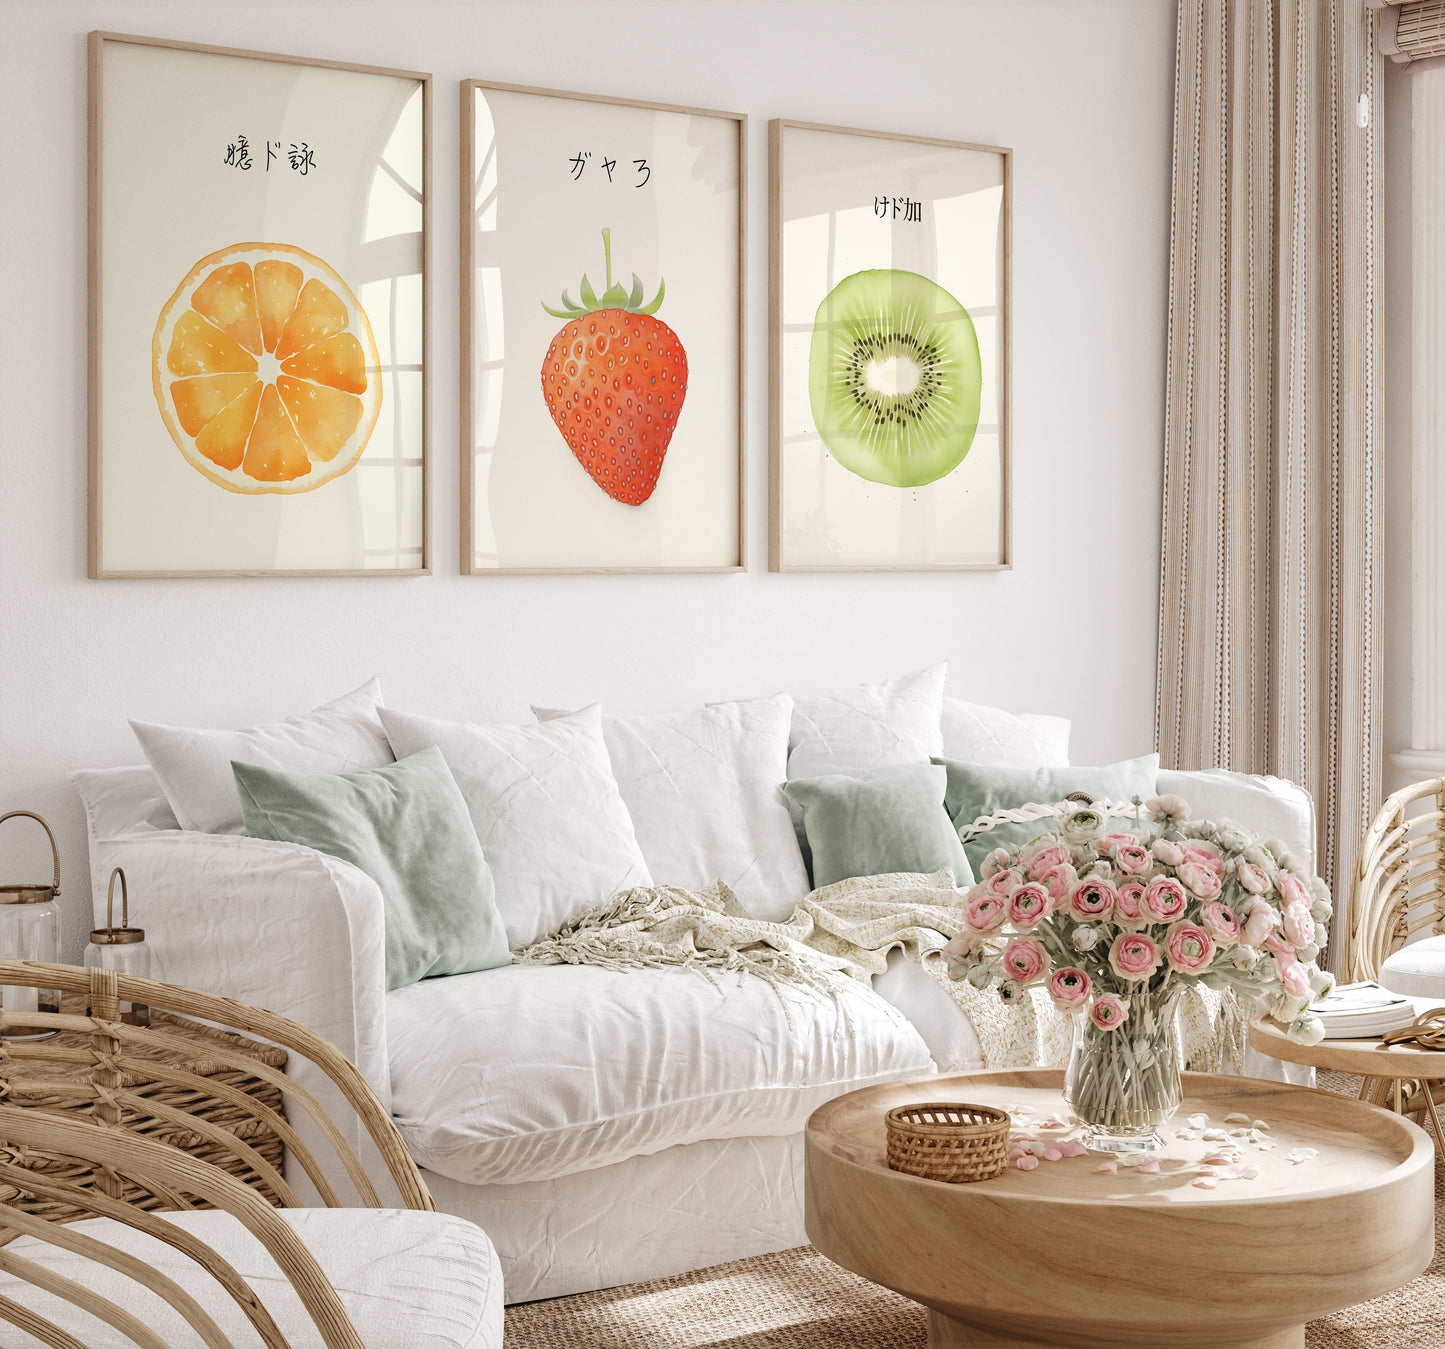 A cozy living room with framed fruit illustrations, a white sofa, and a bouquet of pink flowers on a coffee table.